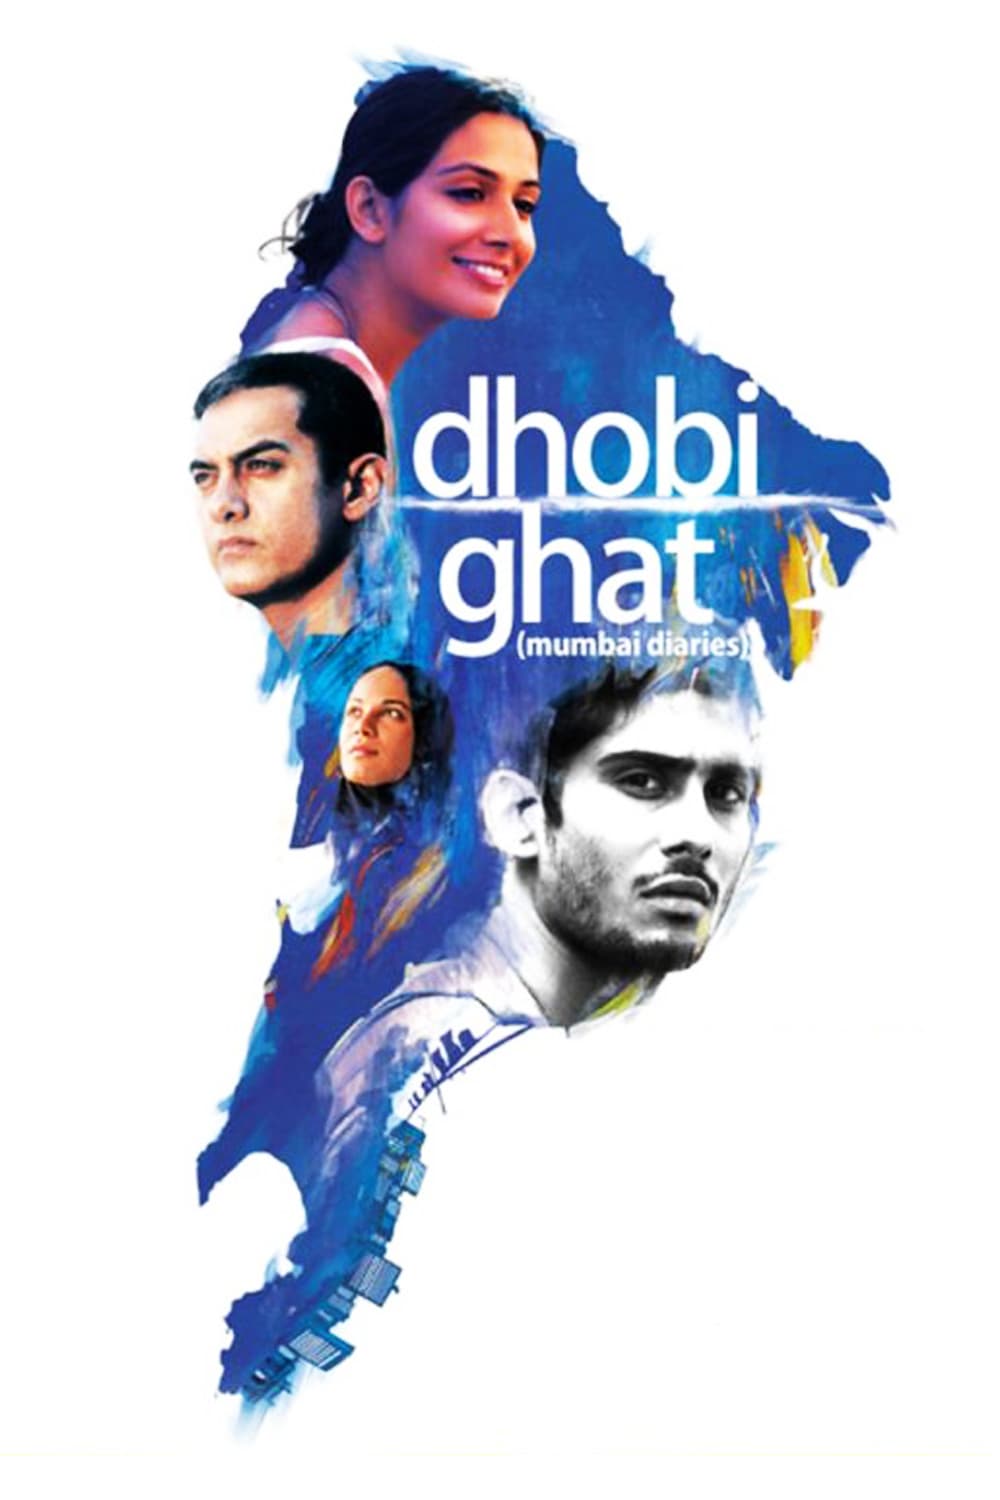 Poster for the movie "Dhobi Ghat"